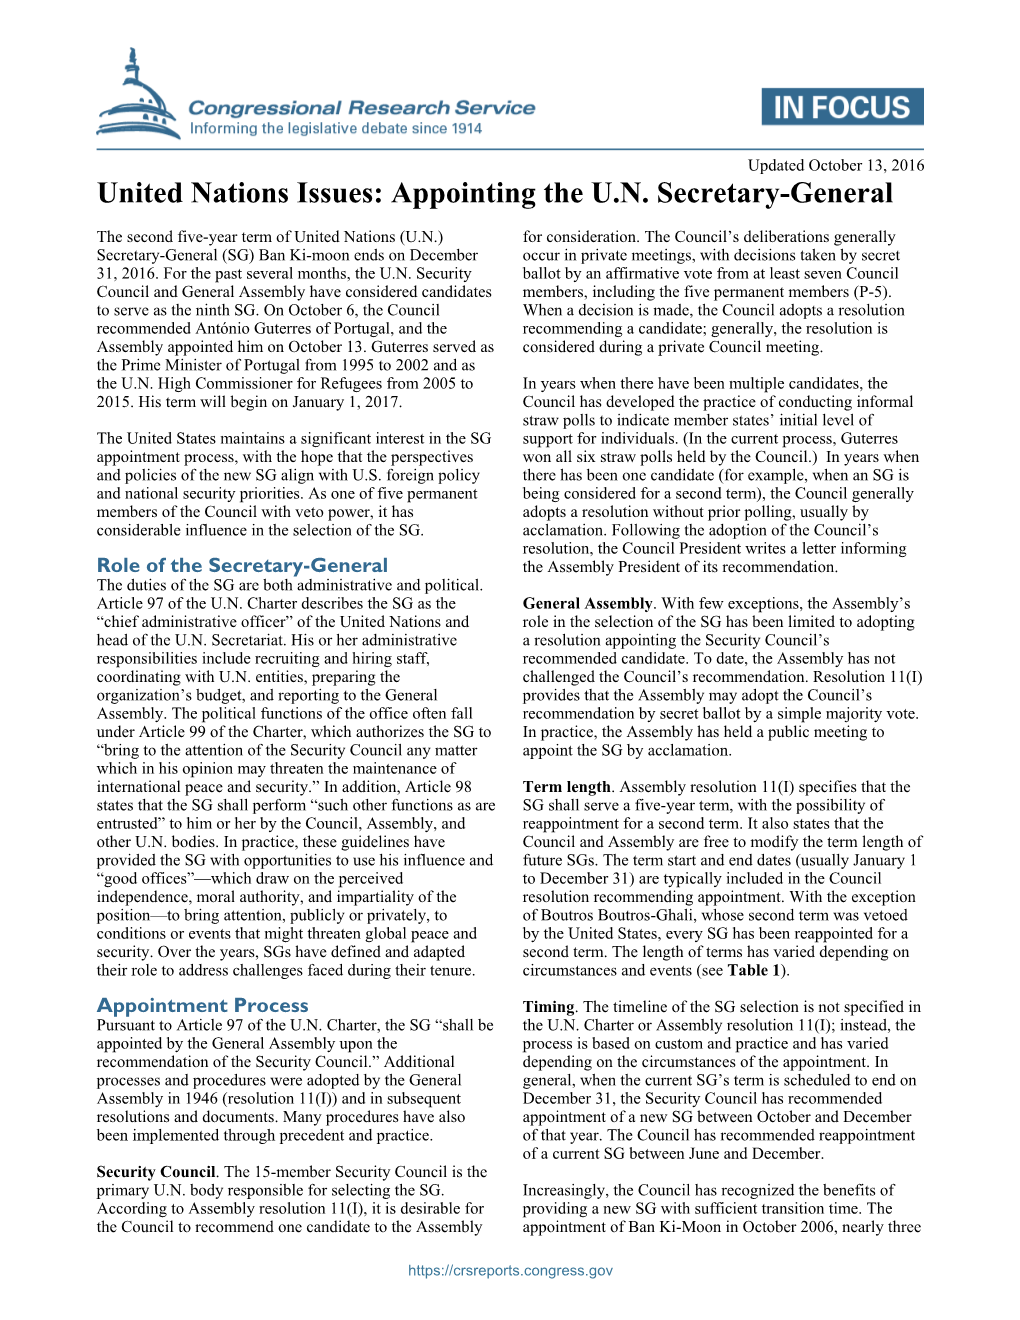 Appointing the UN Secretary-General